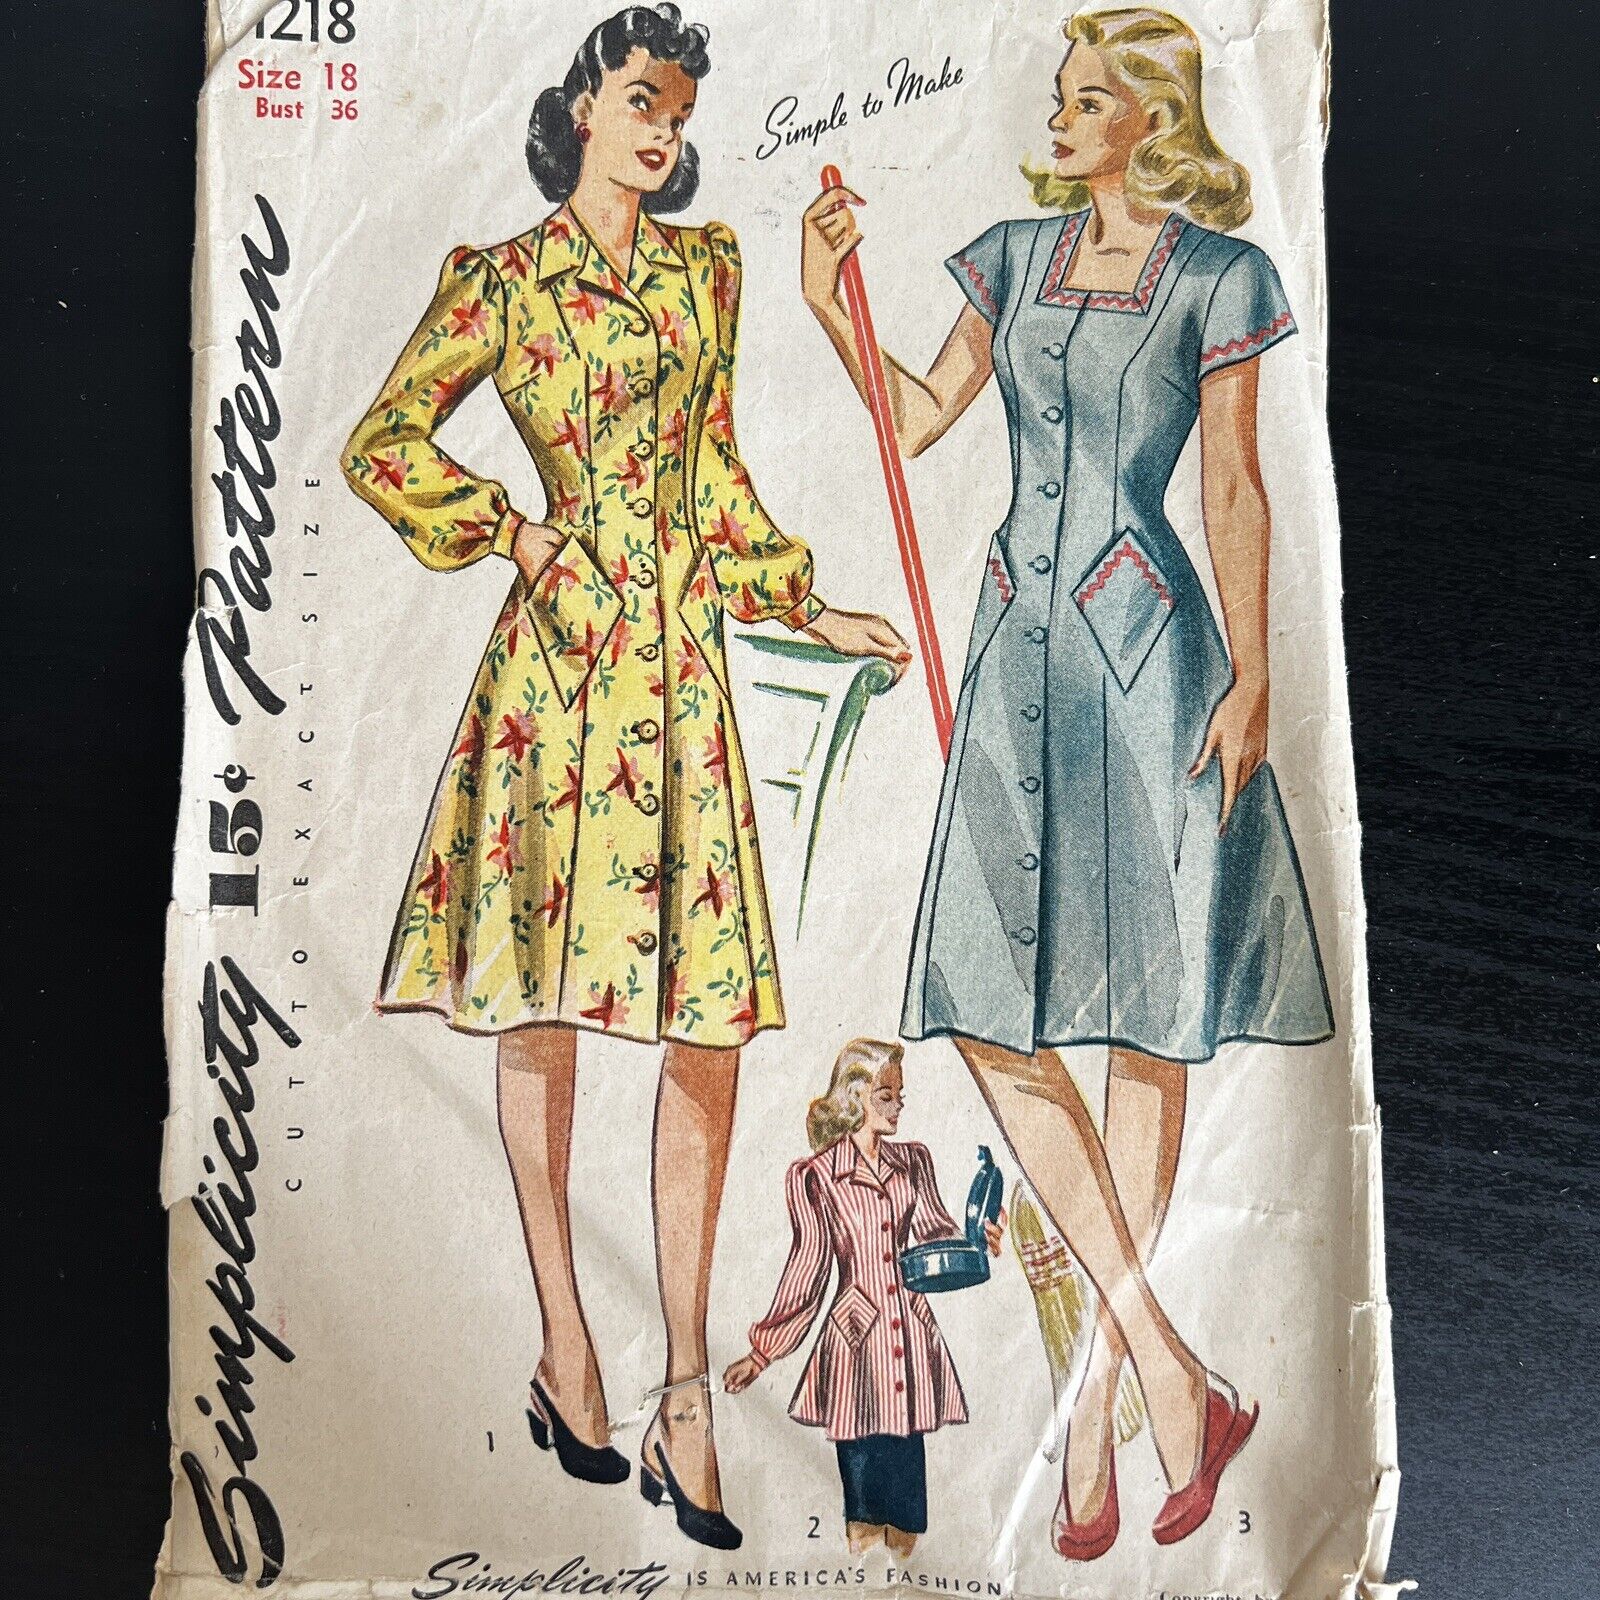 Vintage 1940s Simplicity 1218 Smock or House Dress Sewing Pattern 18 M/L USED